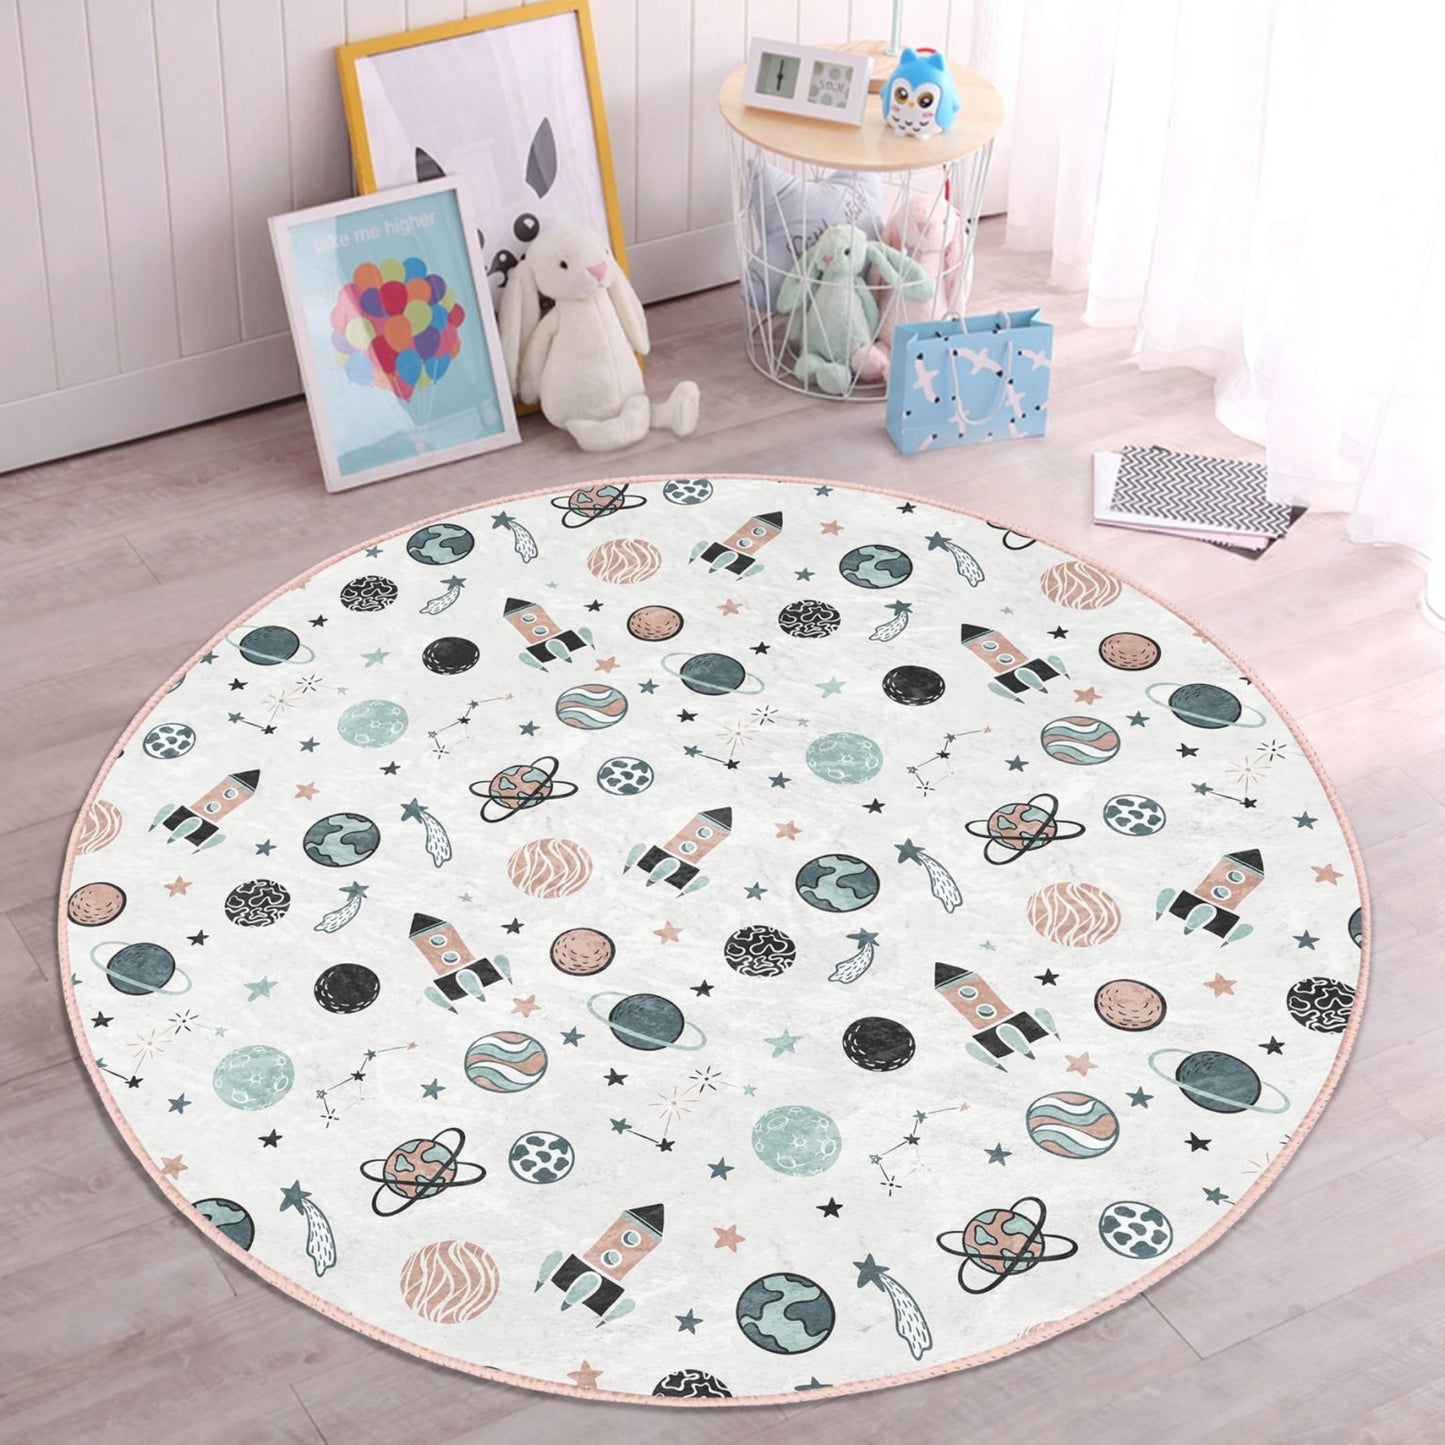 Homeezone's Space Rocket and Planets Pattern Kids' Rug